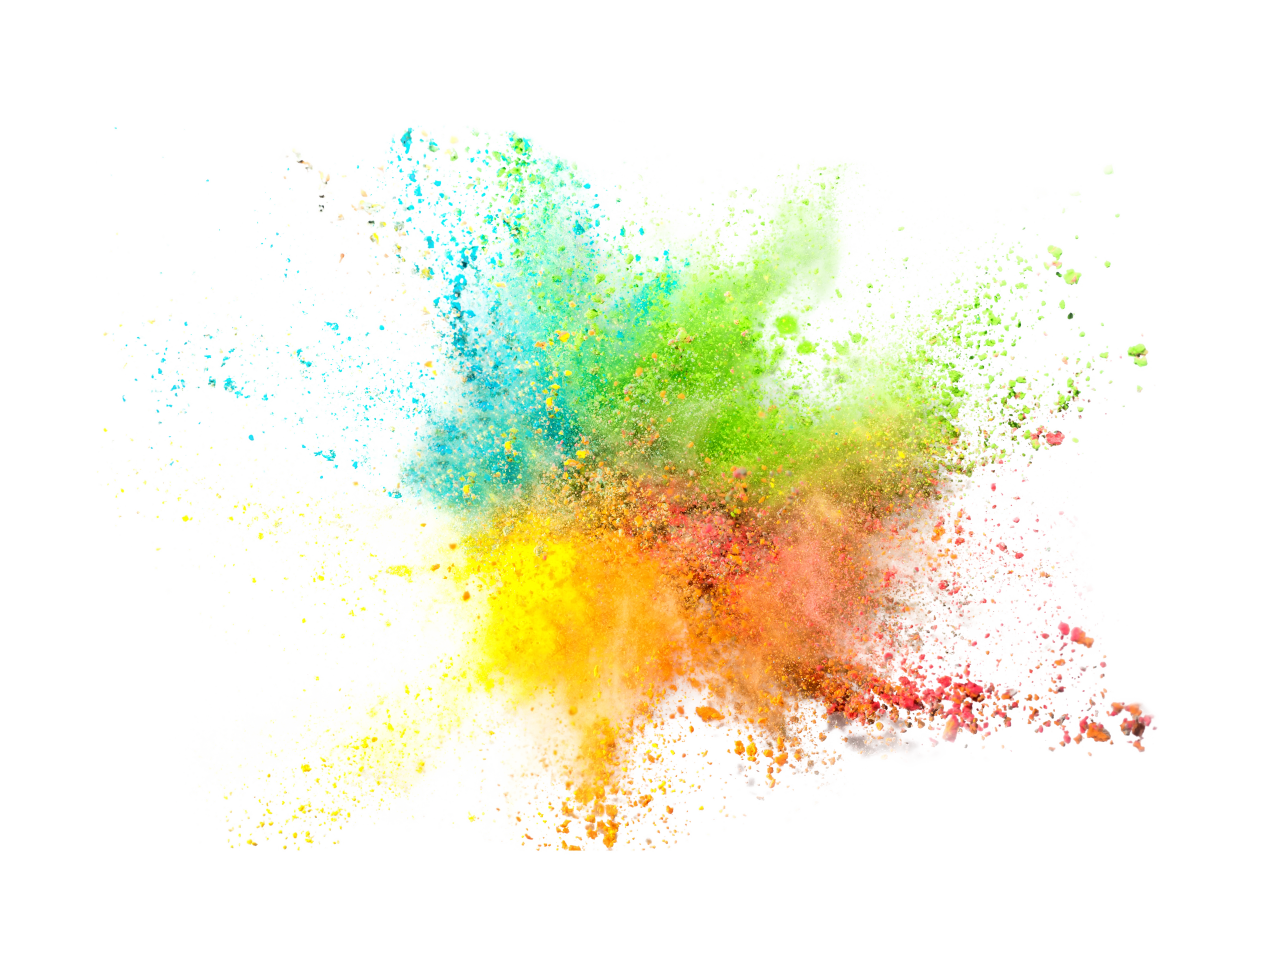 Explosion Of Rainbow Color Powder On White Background Stock Photo | Hot ...